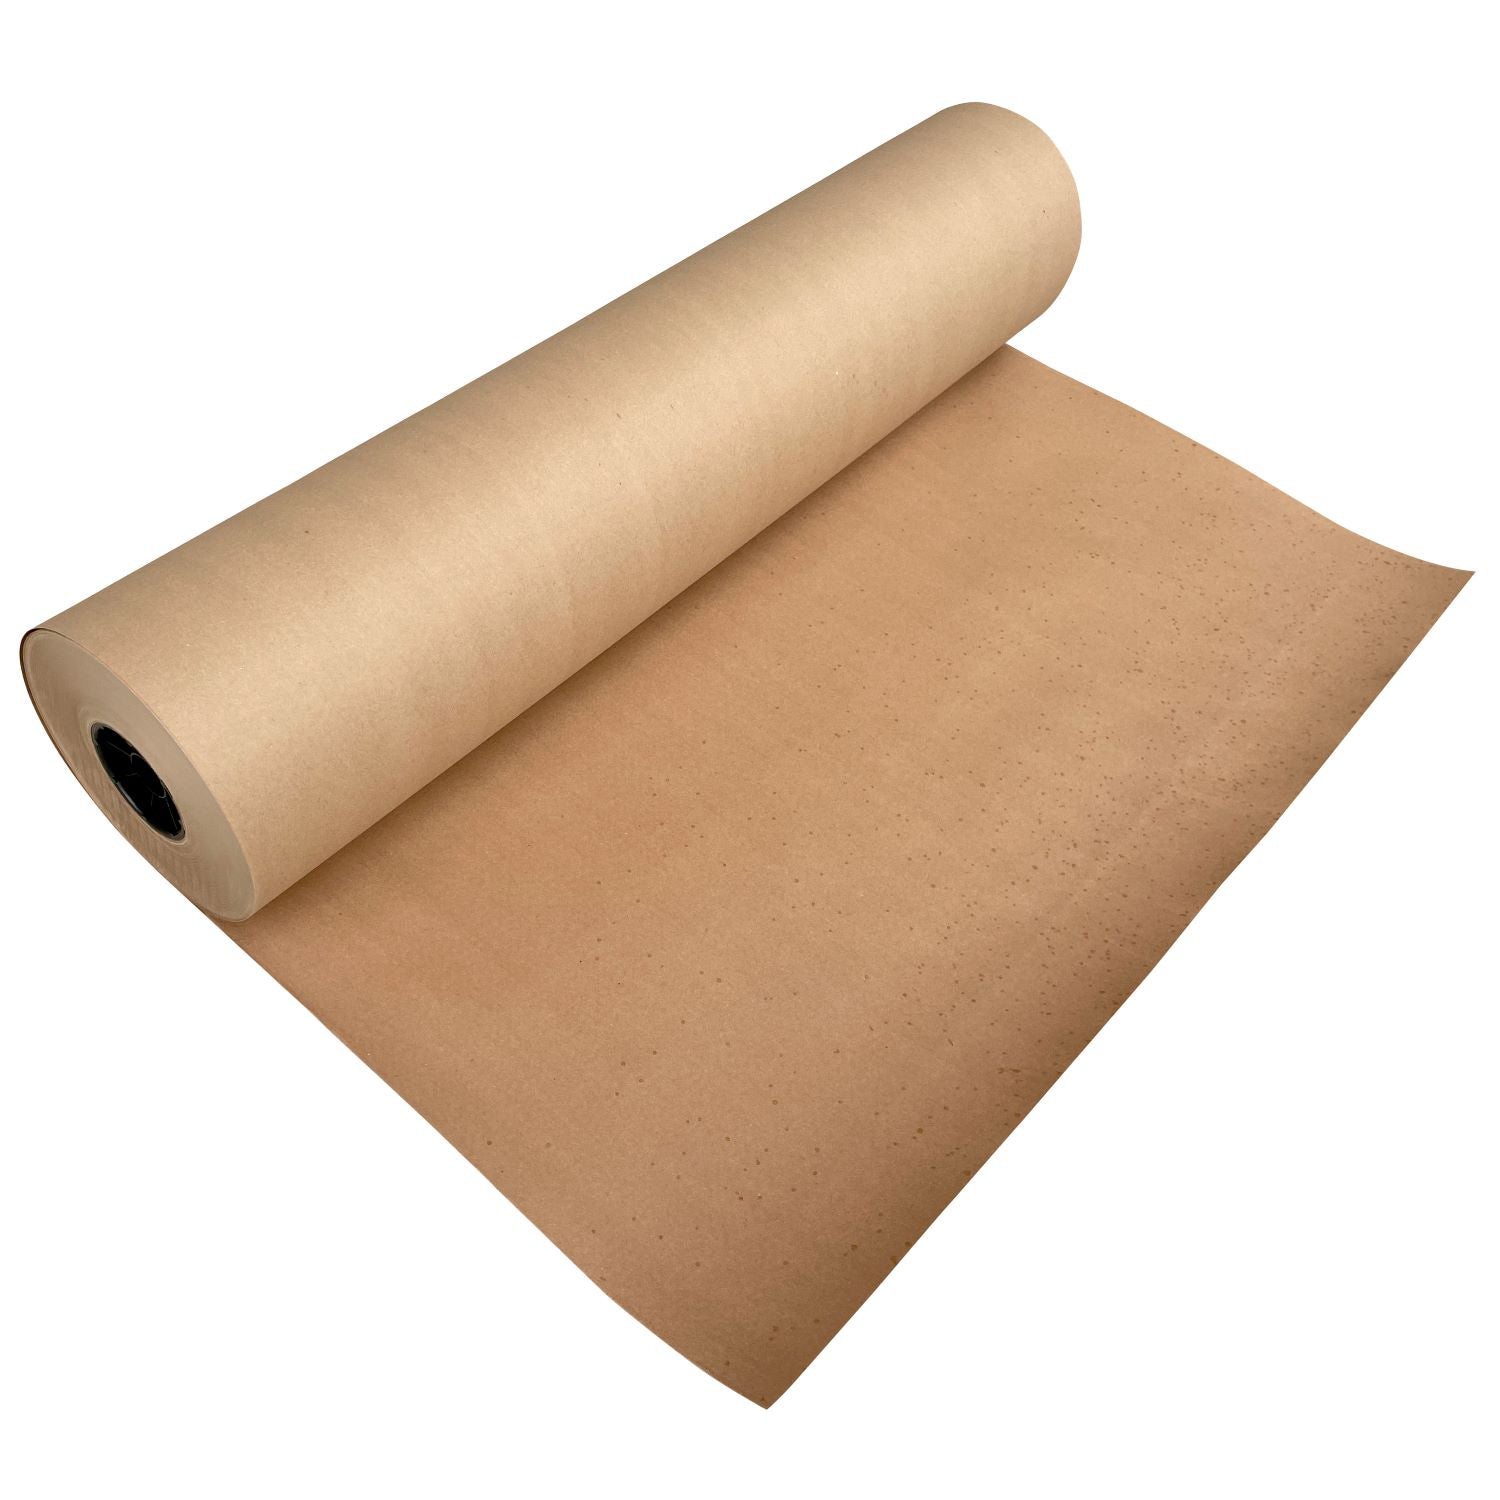 2' X 8', 24 X 96 Brown Kraft Paper Roll, 100% Recycled Paper, Gift